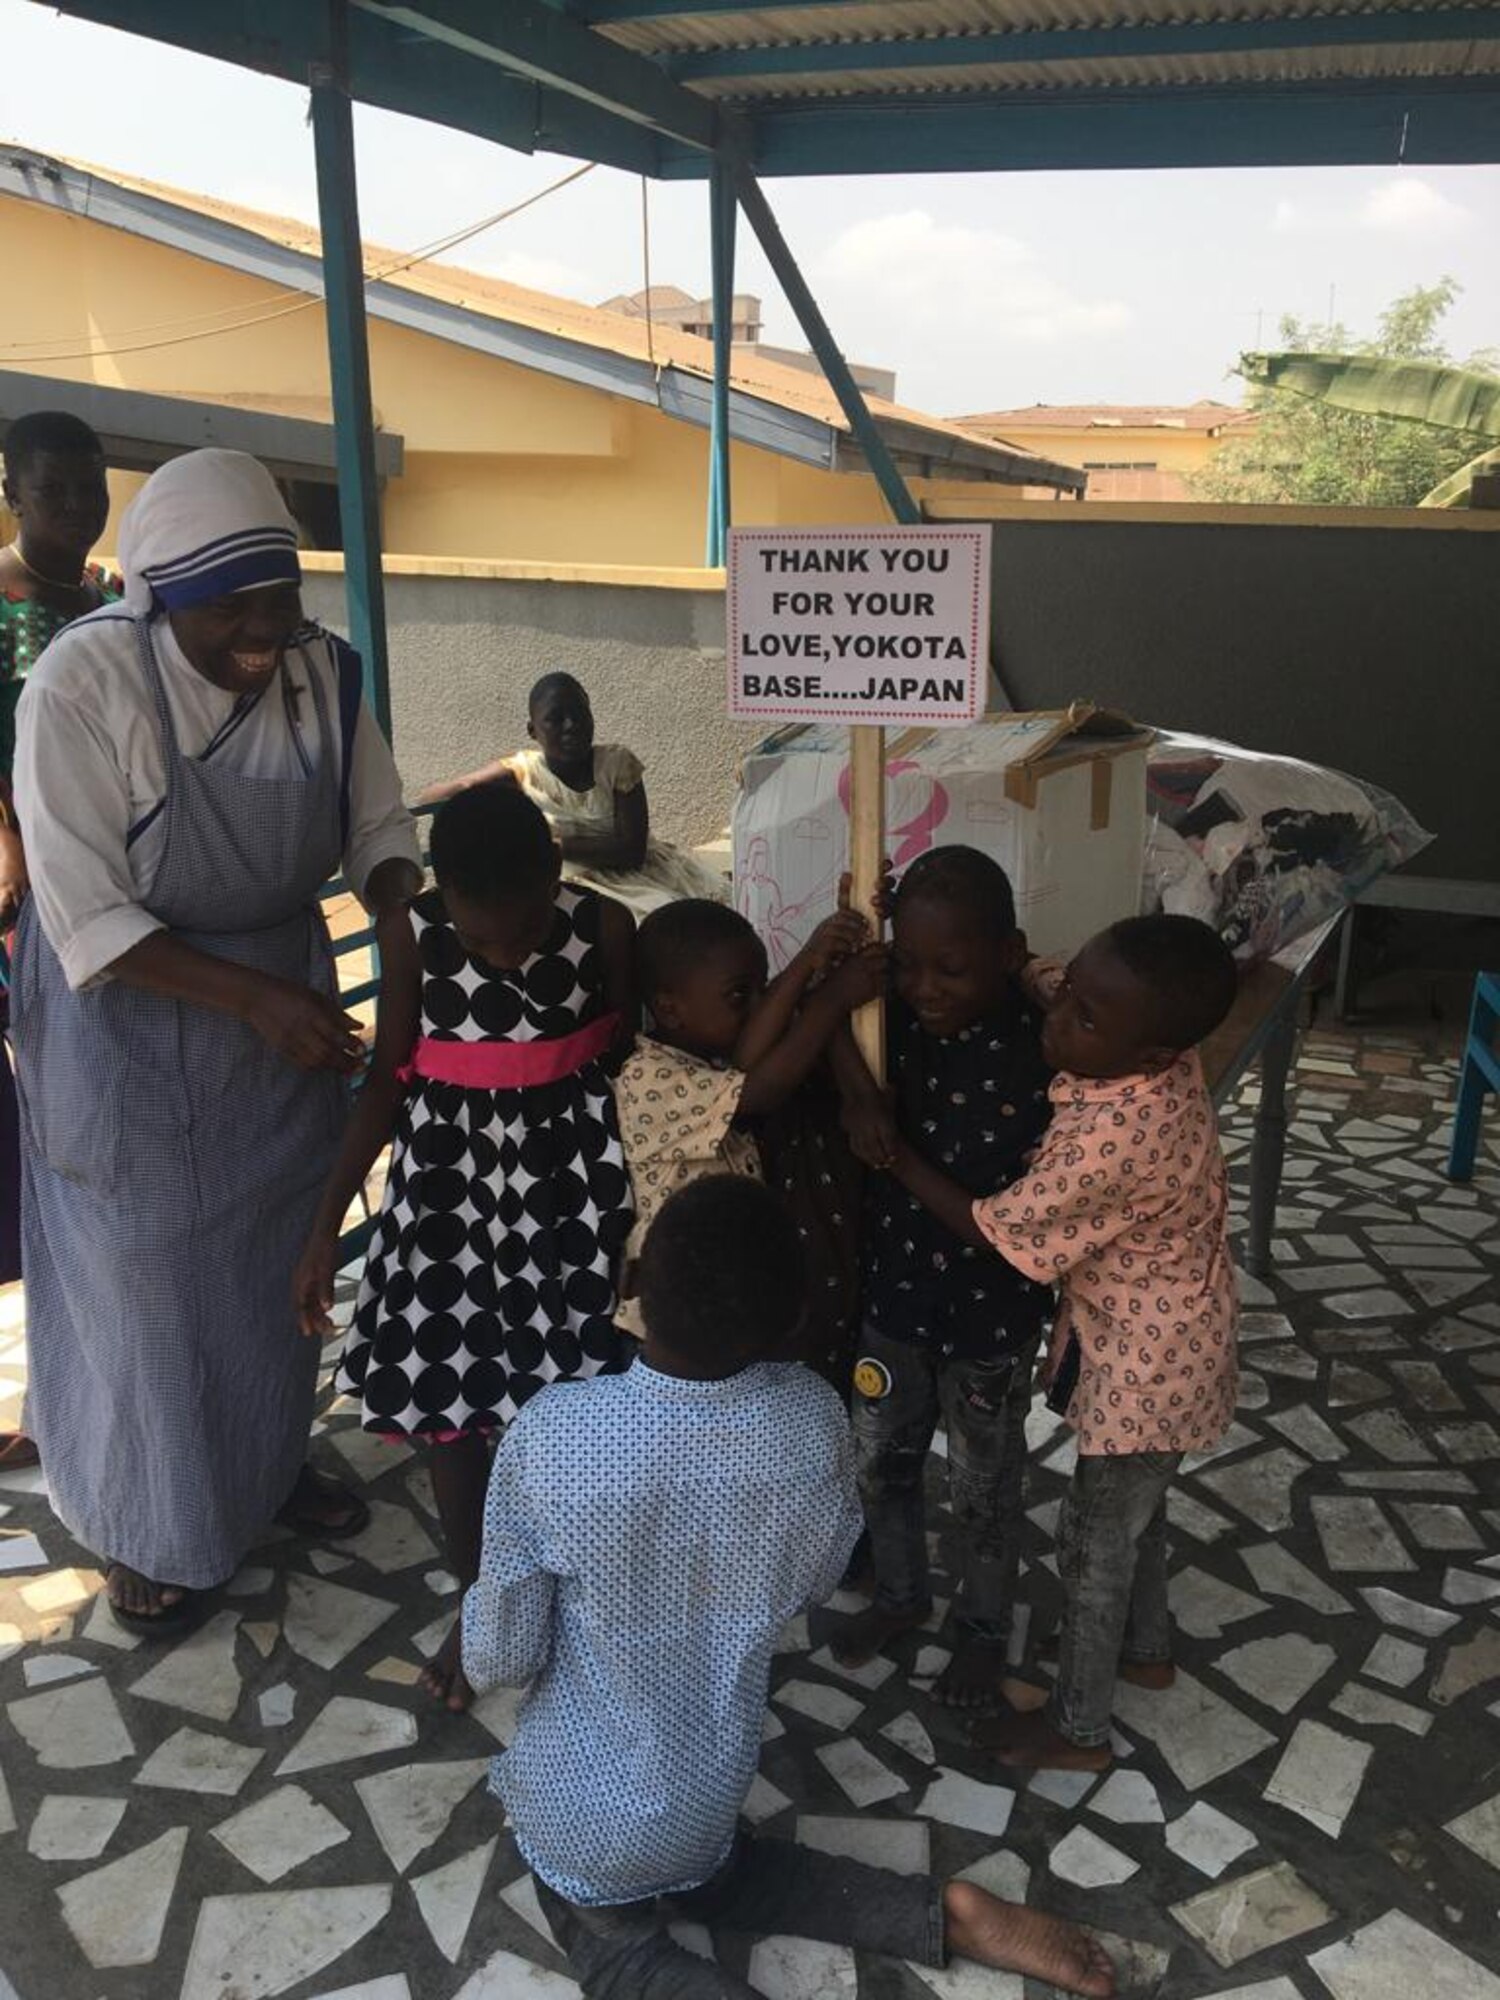 A nun from Ghana is surrounded by children holding a sign that thanks Yokota Air Base.